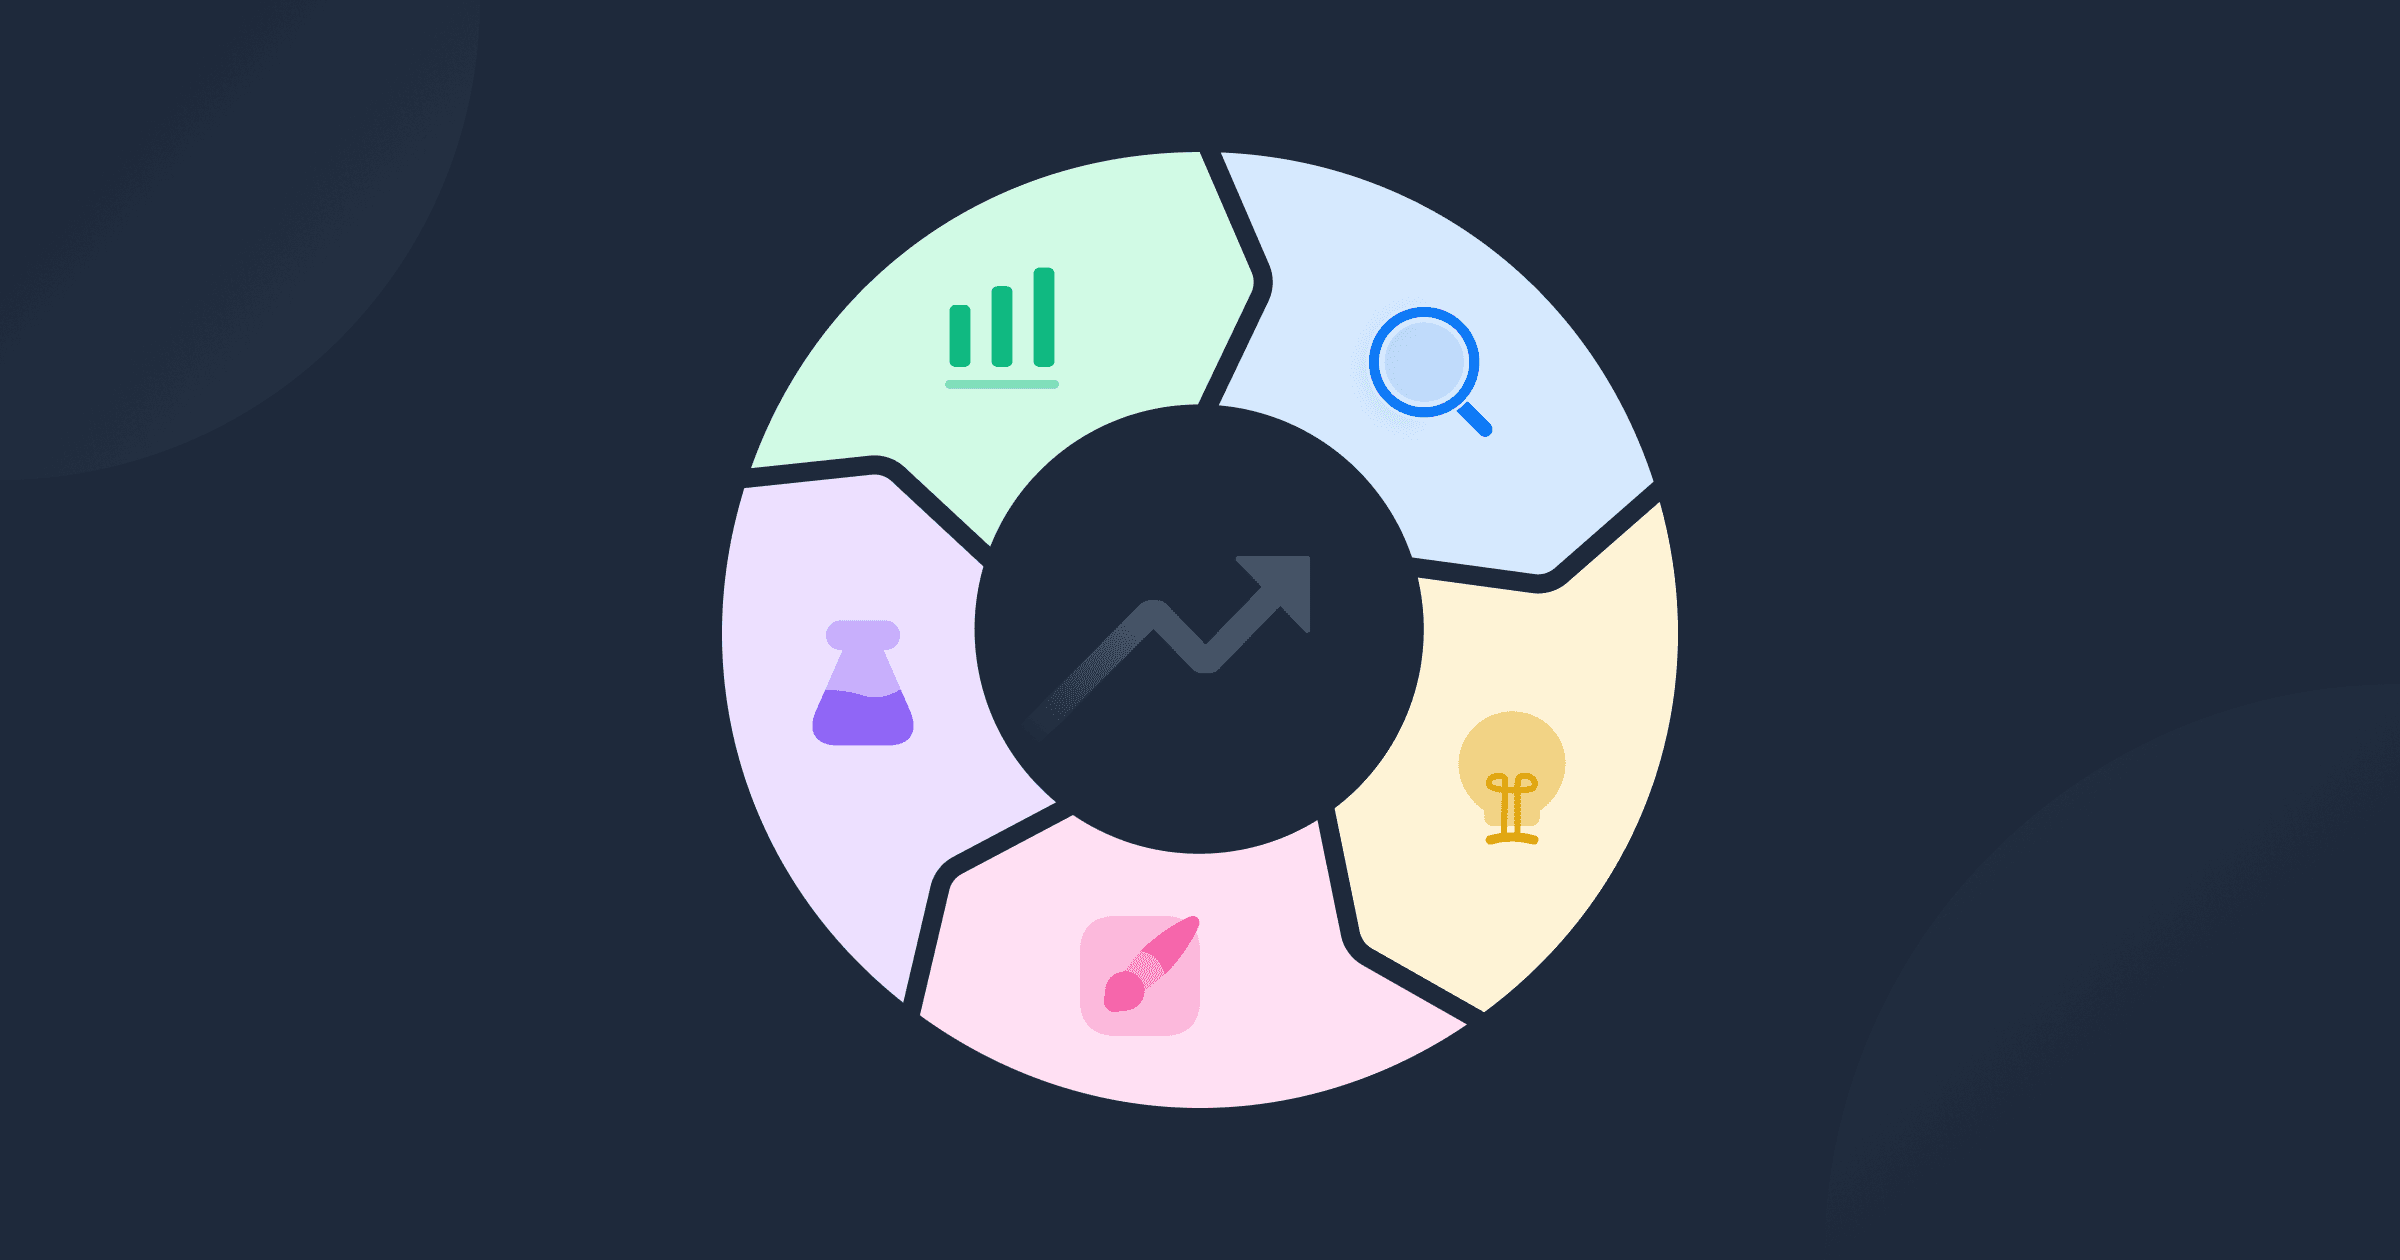 Image containing a circle representing the CRO cycle stages: analysis, ideation, implementation, testing, and checking results.